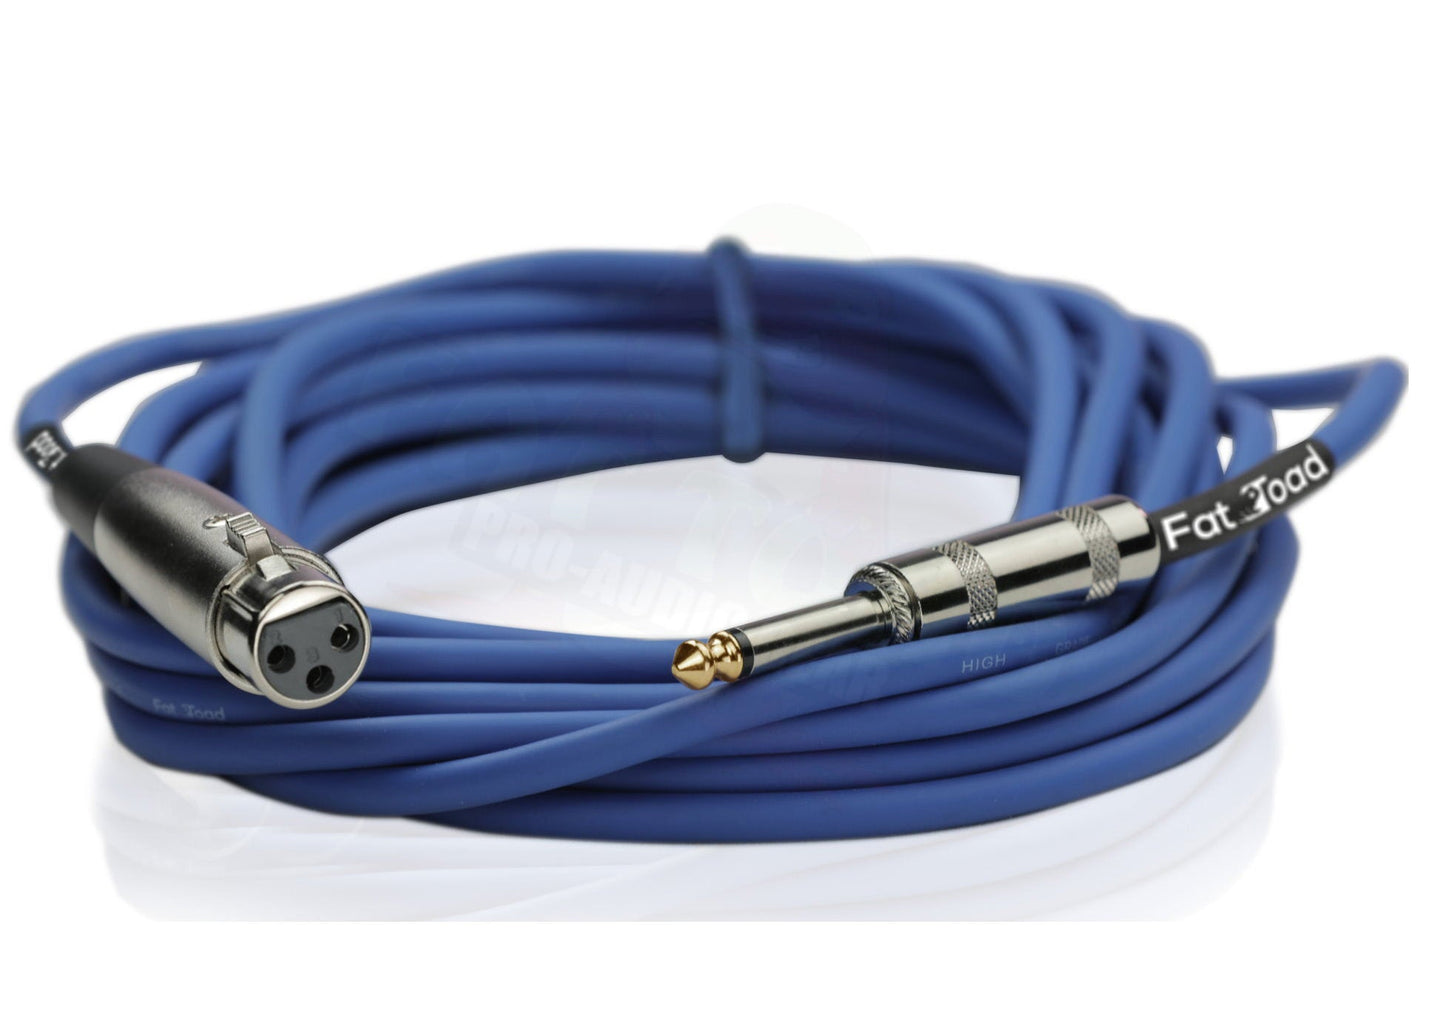 XLR Female to 1/4" Male Jack Microphone Cables (4 Pack) by FAT TOAD - 20ft Pro Audio Blue Mic Cord Extension Patch Lo-Z Connector, 24 AWG Wire